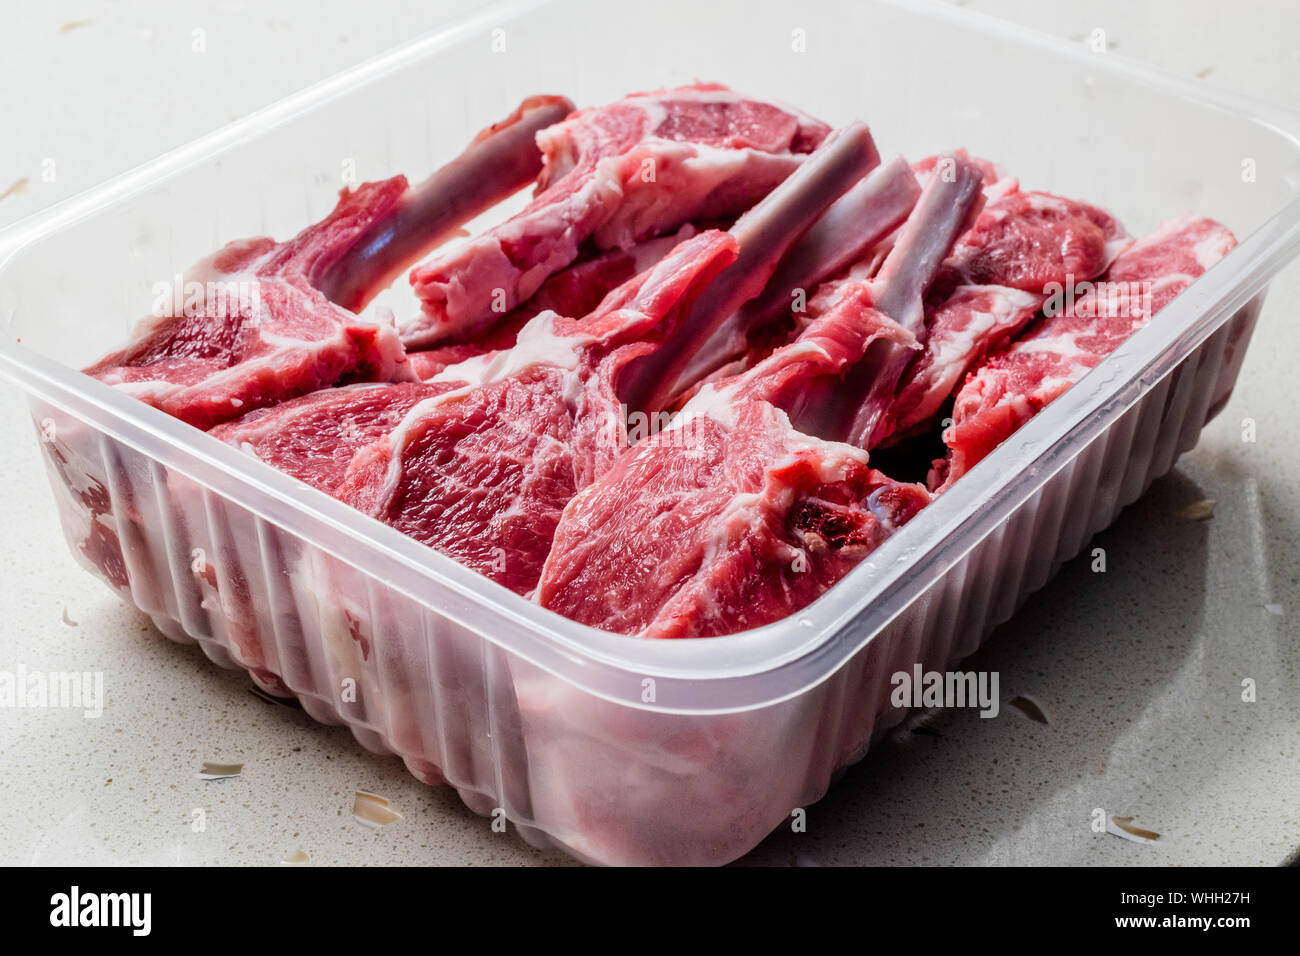 Raw Bloody Lamb Chops Meat in Plastic Package / Box or Container. Organic  Food Stock Photo - Alamy